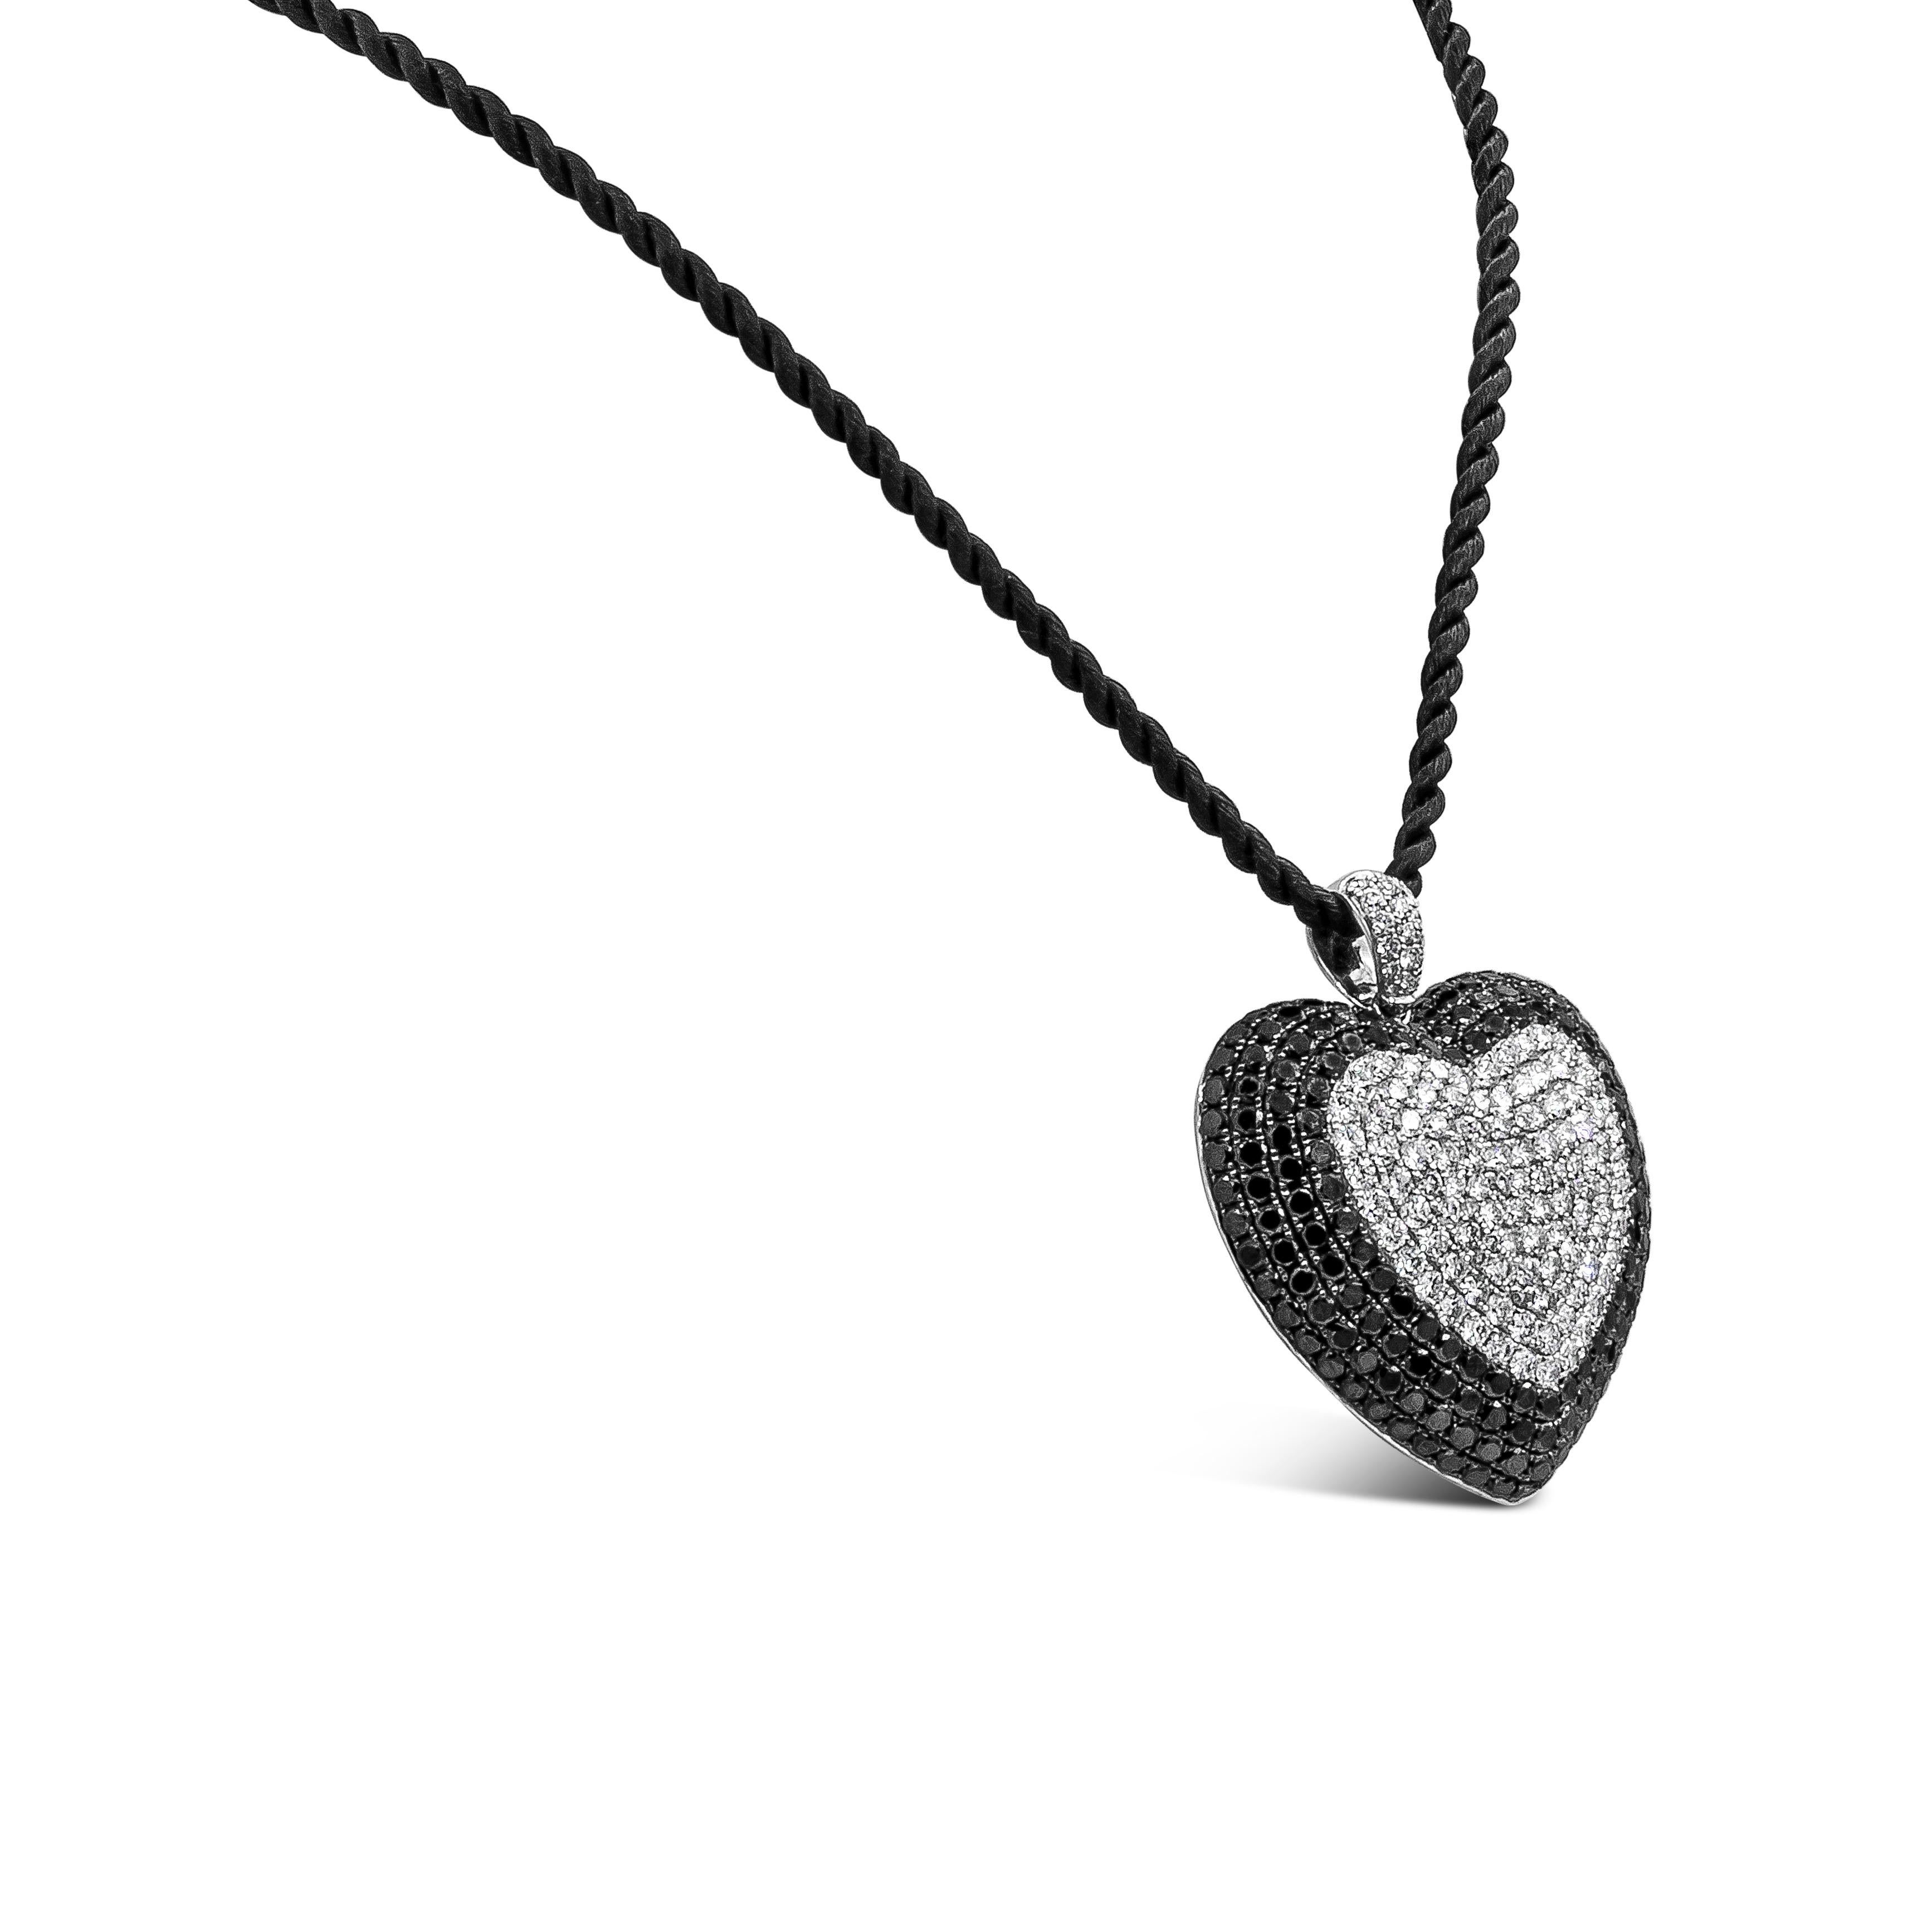 An important and beautiful pendant necklace showcasing a cluster of round brilliant black and white diamonds set in a domed heart shape pendant made in 18k white gold. Diamonds weigh 12.40 carats total. Suspended on a 18 inch adjustable rope. Length